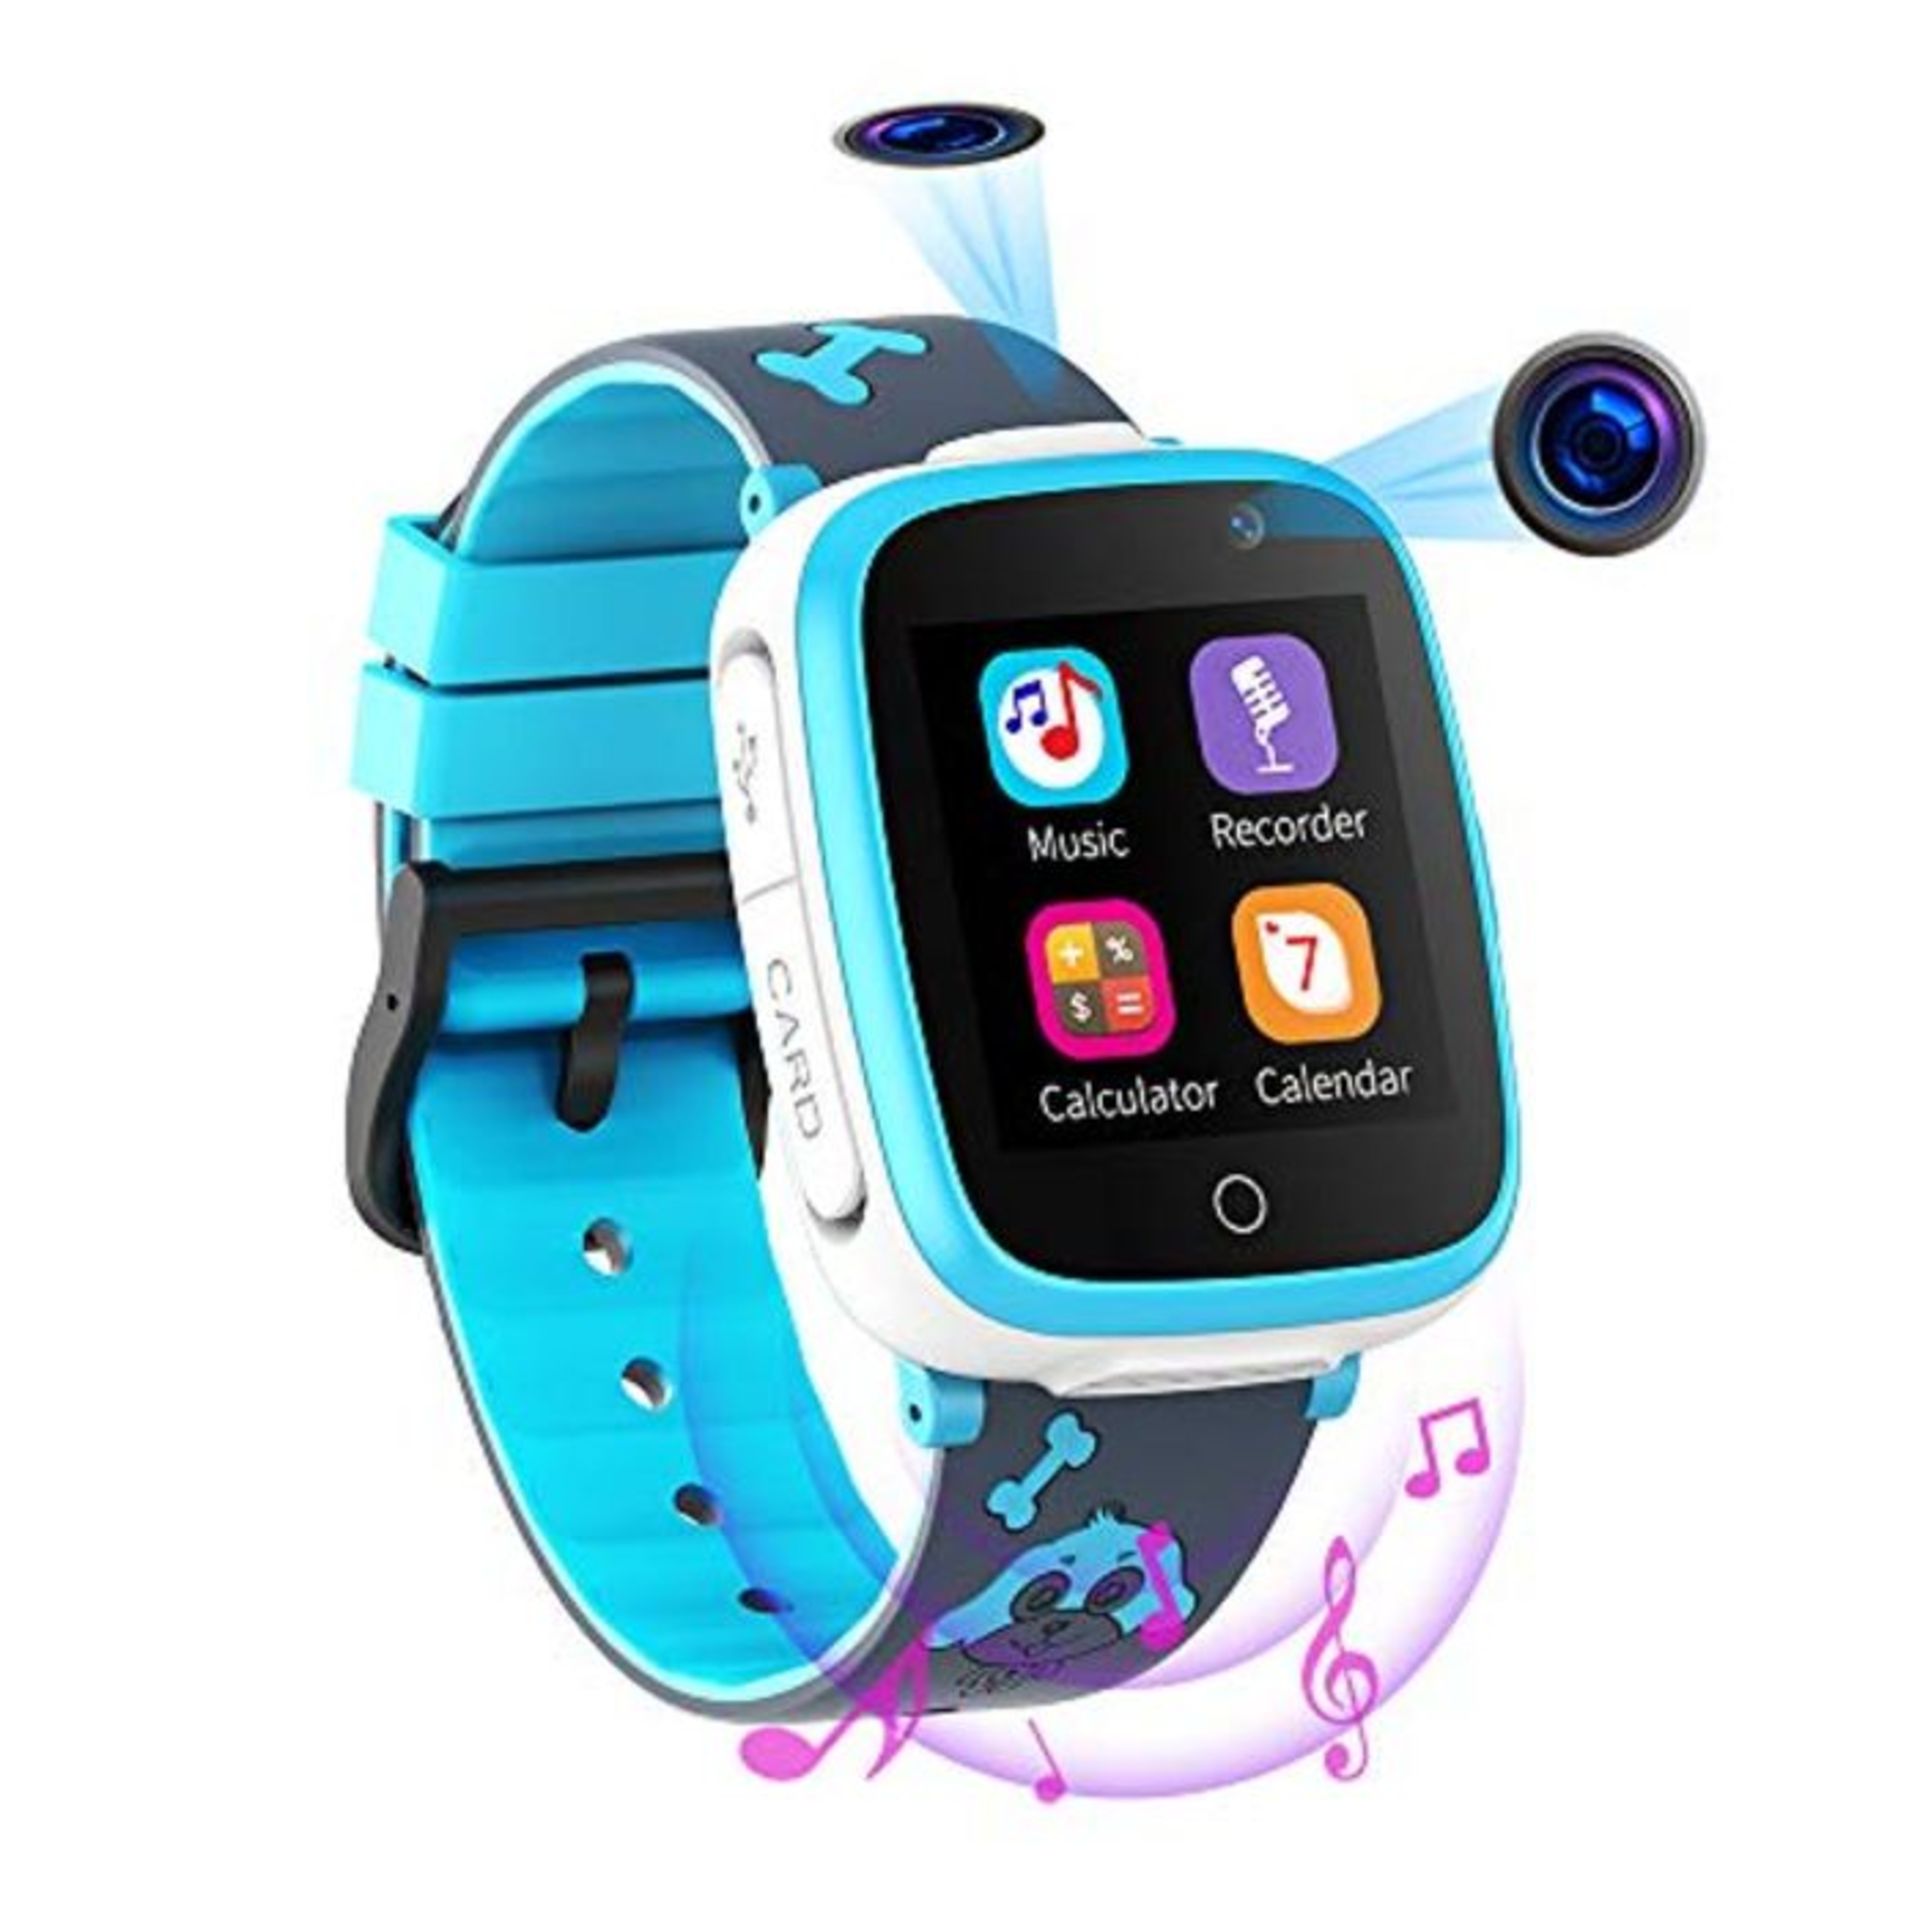 [CRACKED] Fitonme Kids Smart Watch?2 Cameras SOS Two Way Call HD Music Player 7 Puzzzl